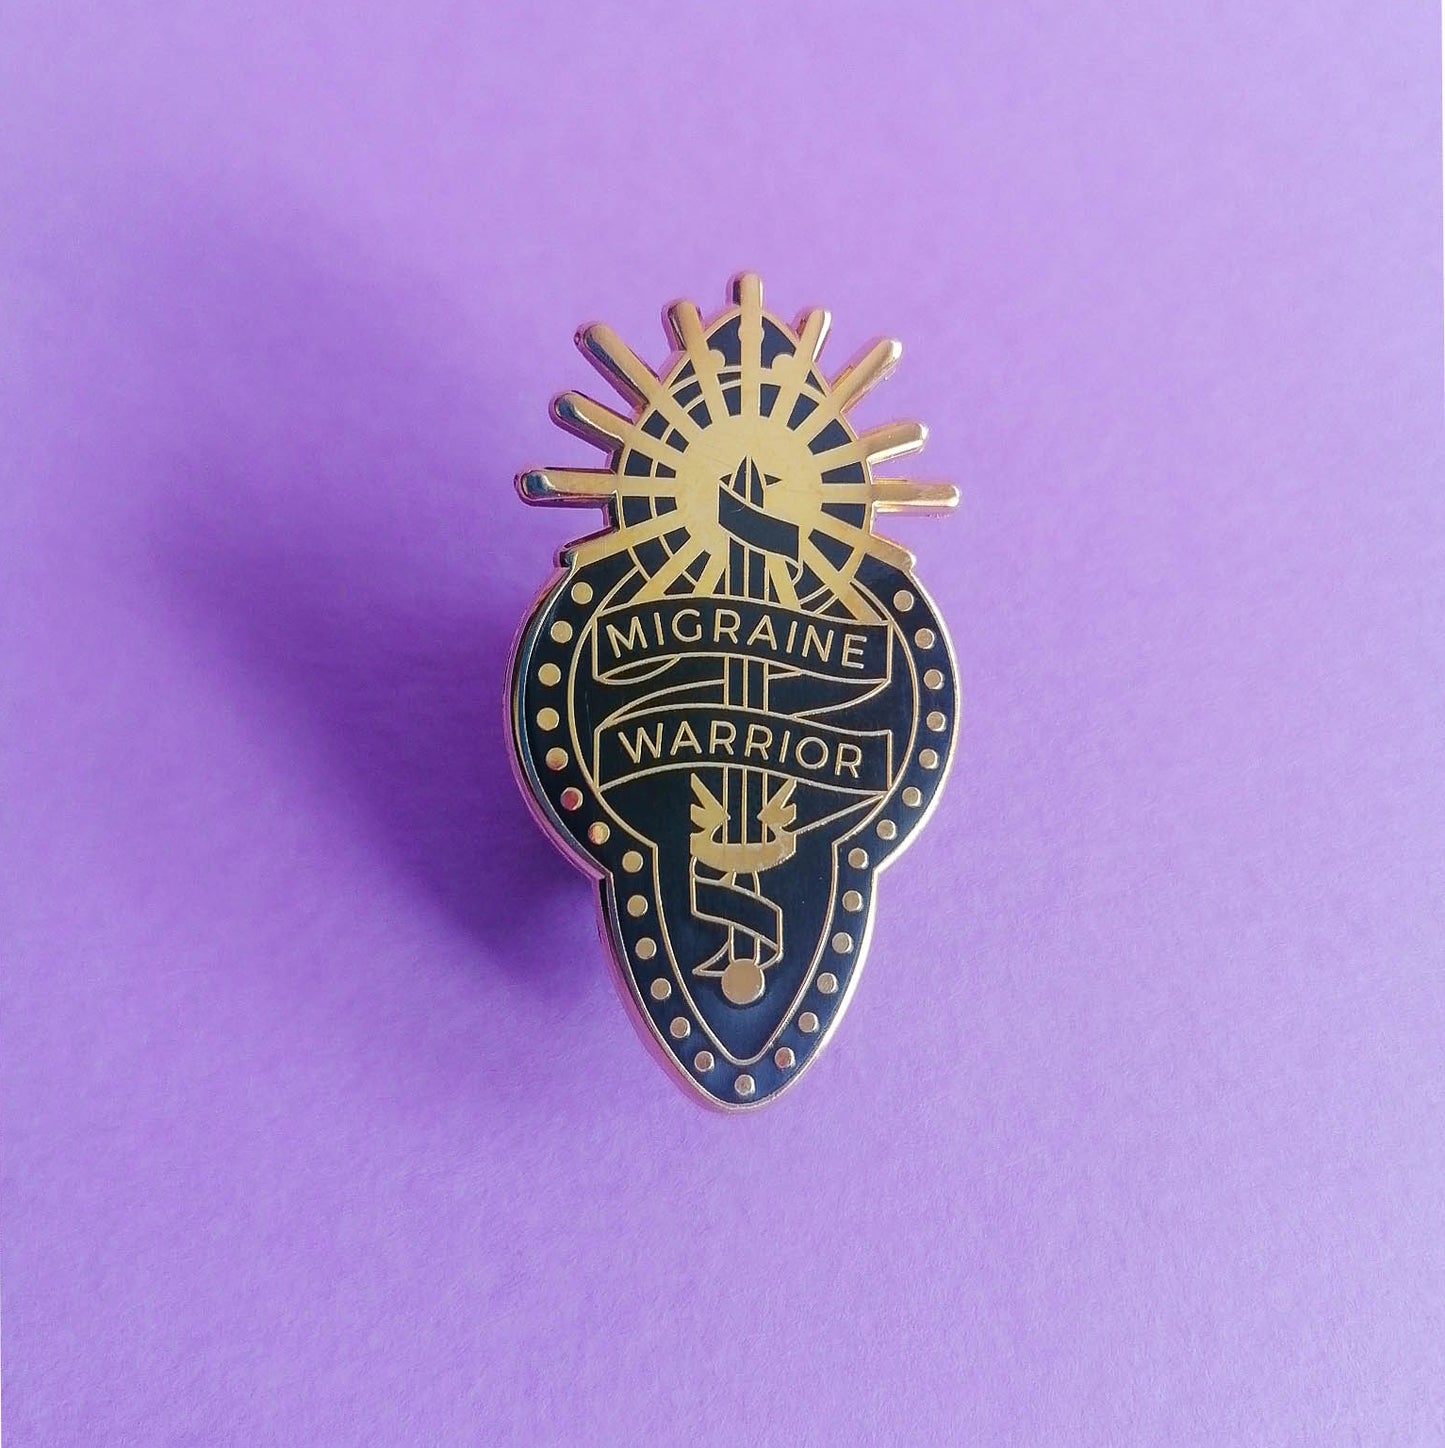 A black and gold enamel pin with design depicting a ribbon wrapped around a sword and sun, reading "Migraine Warrior" on purple background.